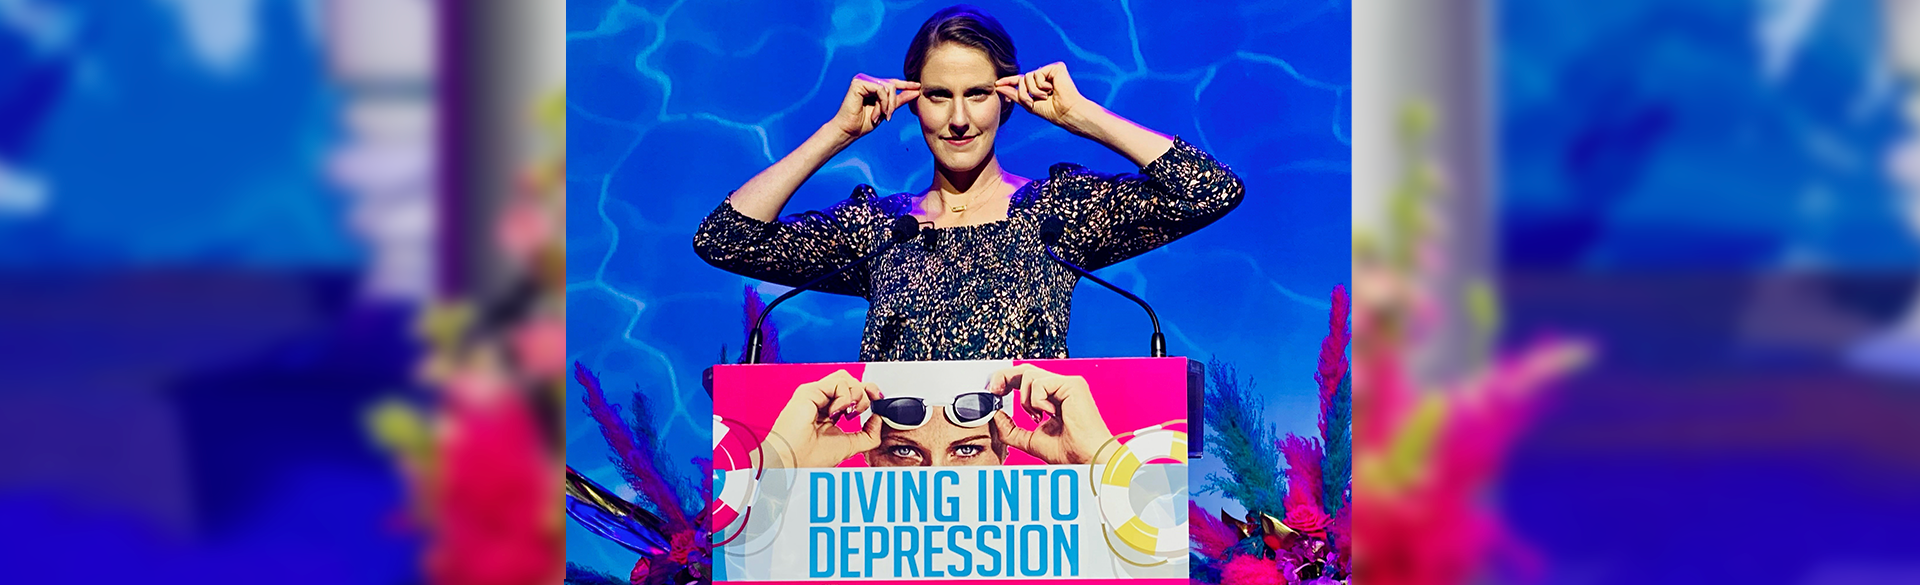 Olympian Missy Franklin speaks at an event for the Helen and Arthur E. Johnson Depression Center